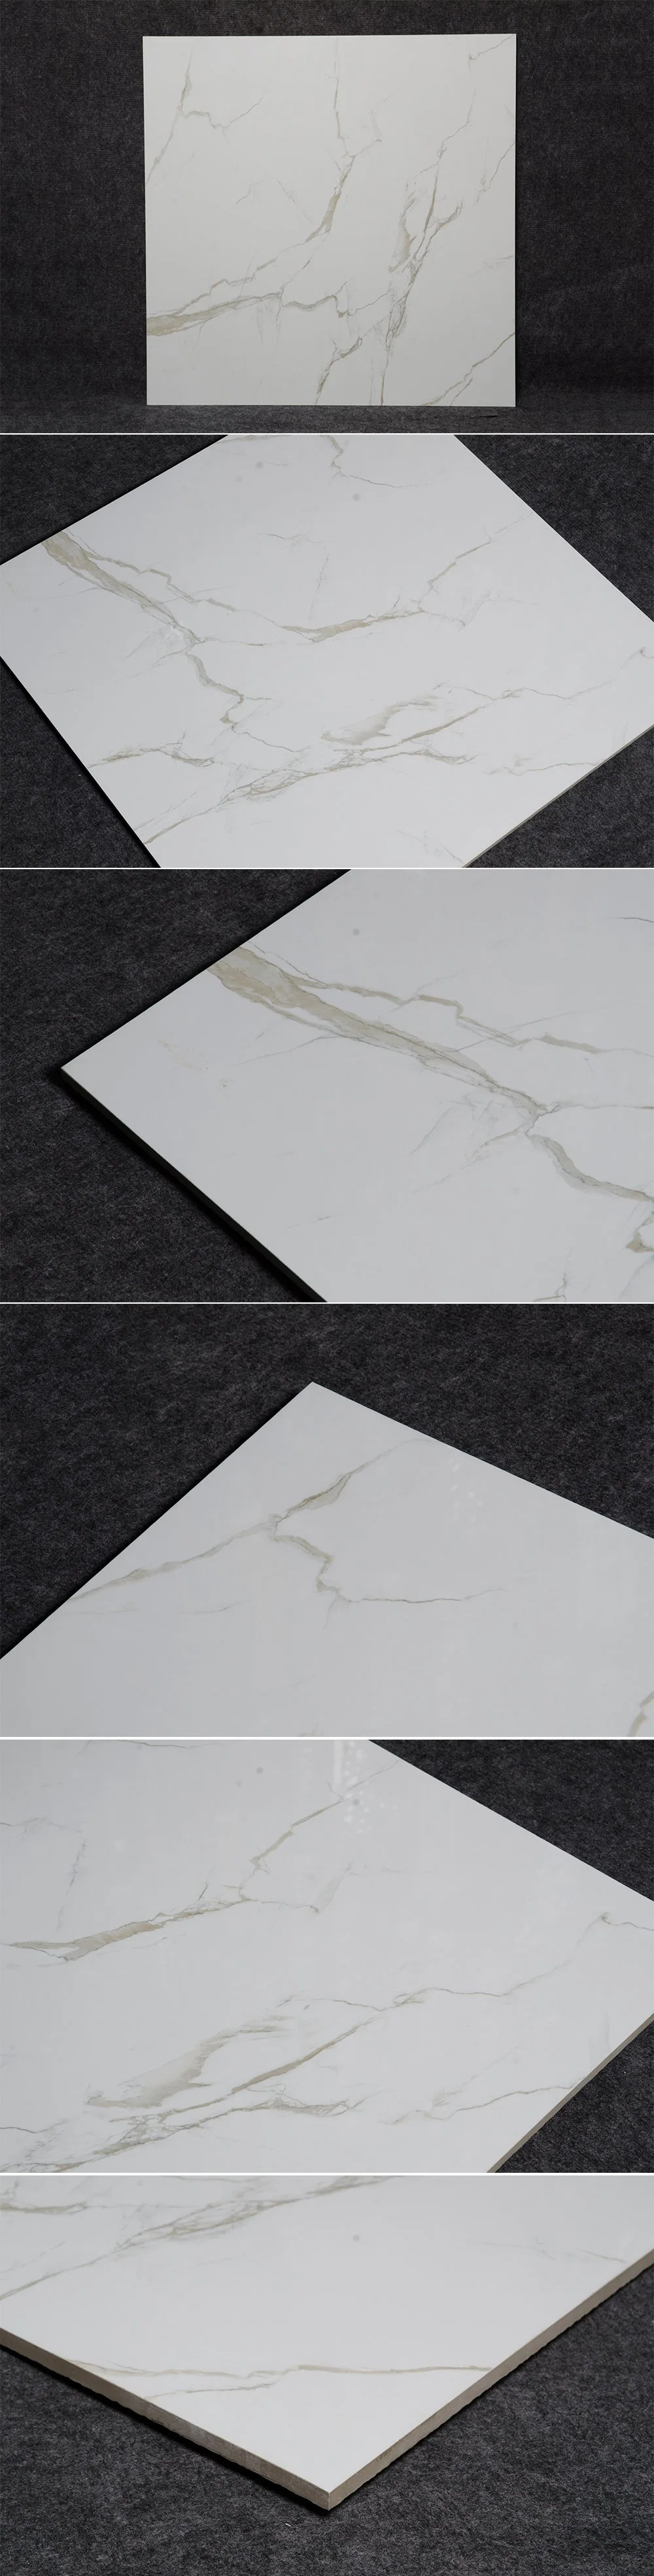 Price Per Square Foot Heat Resistance Chinese Porcelain Tile Quality